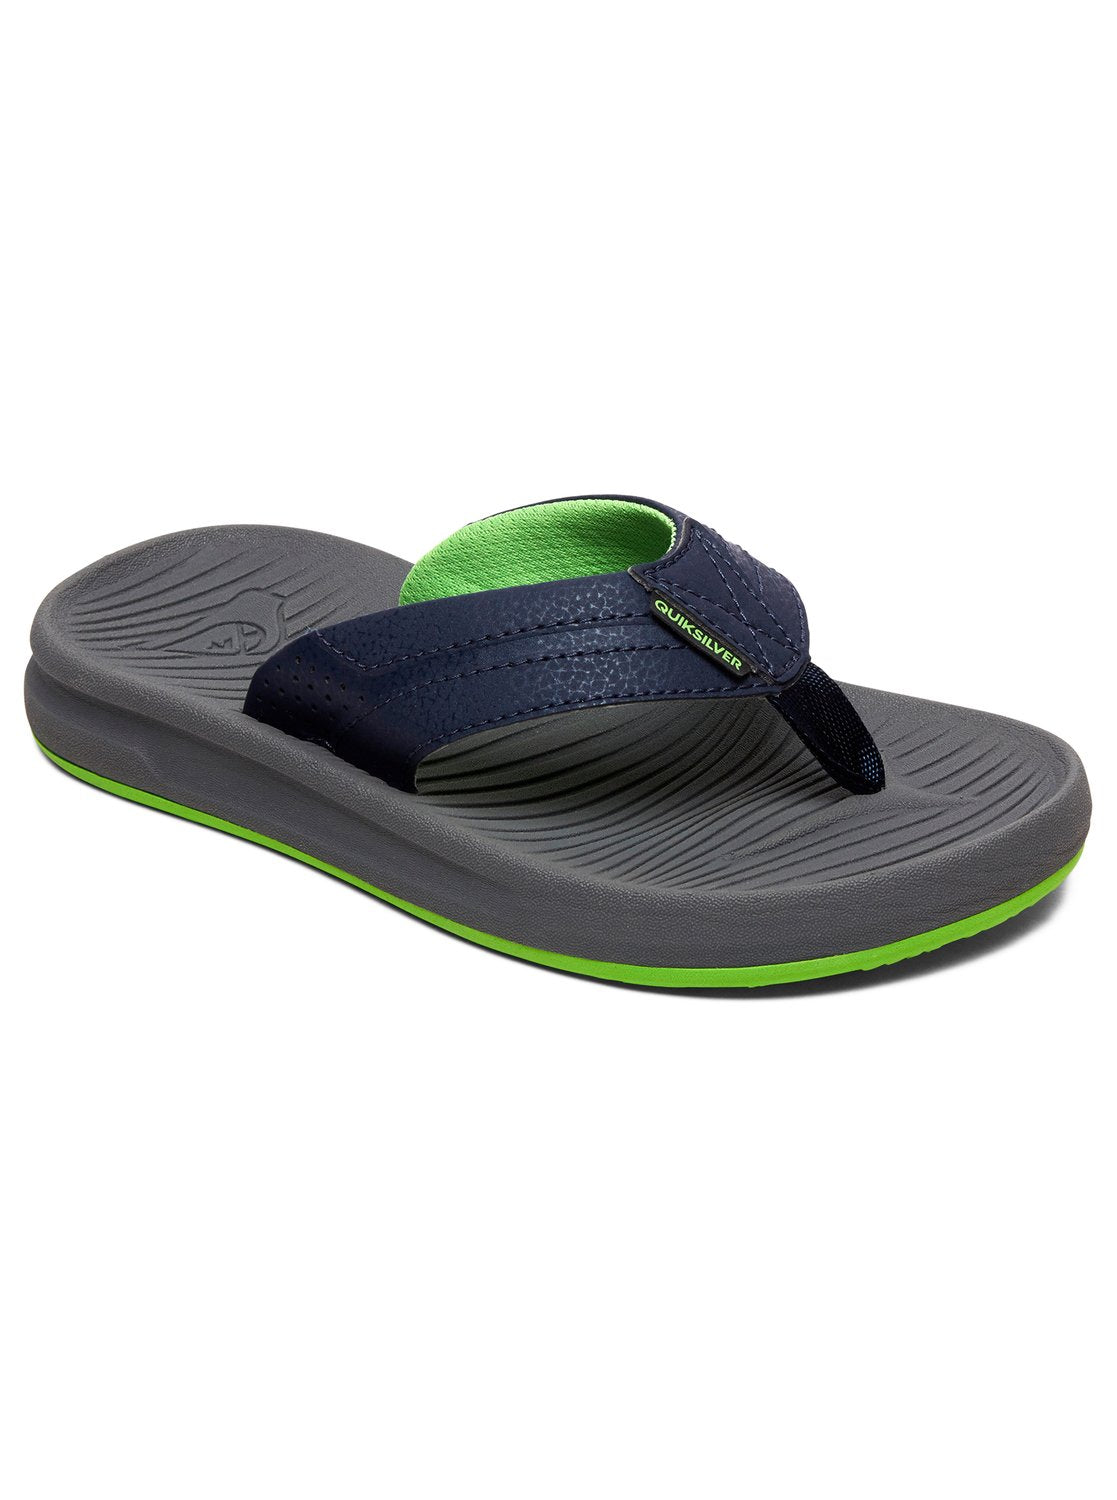 Quiksilver Oasis Youth Sandals XBSB-Blue-Grey-Blue 11 C